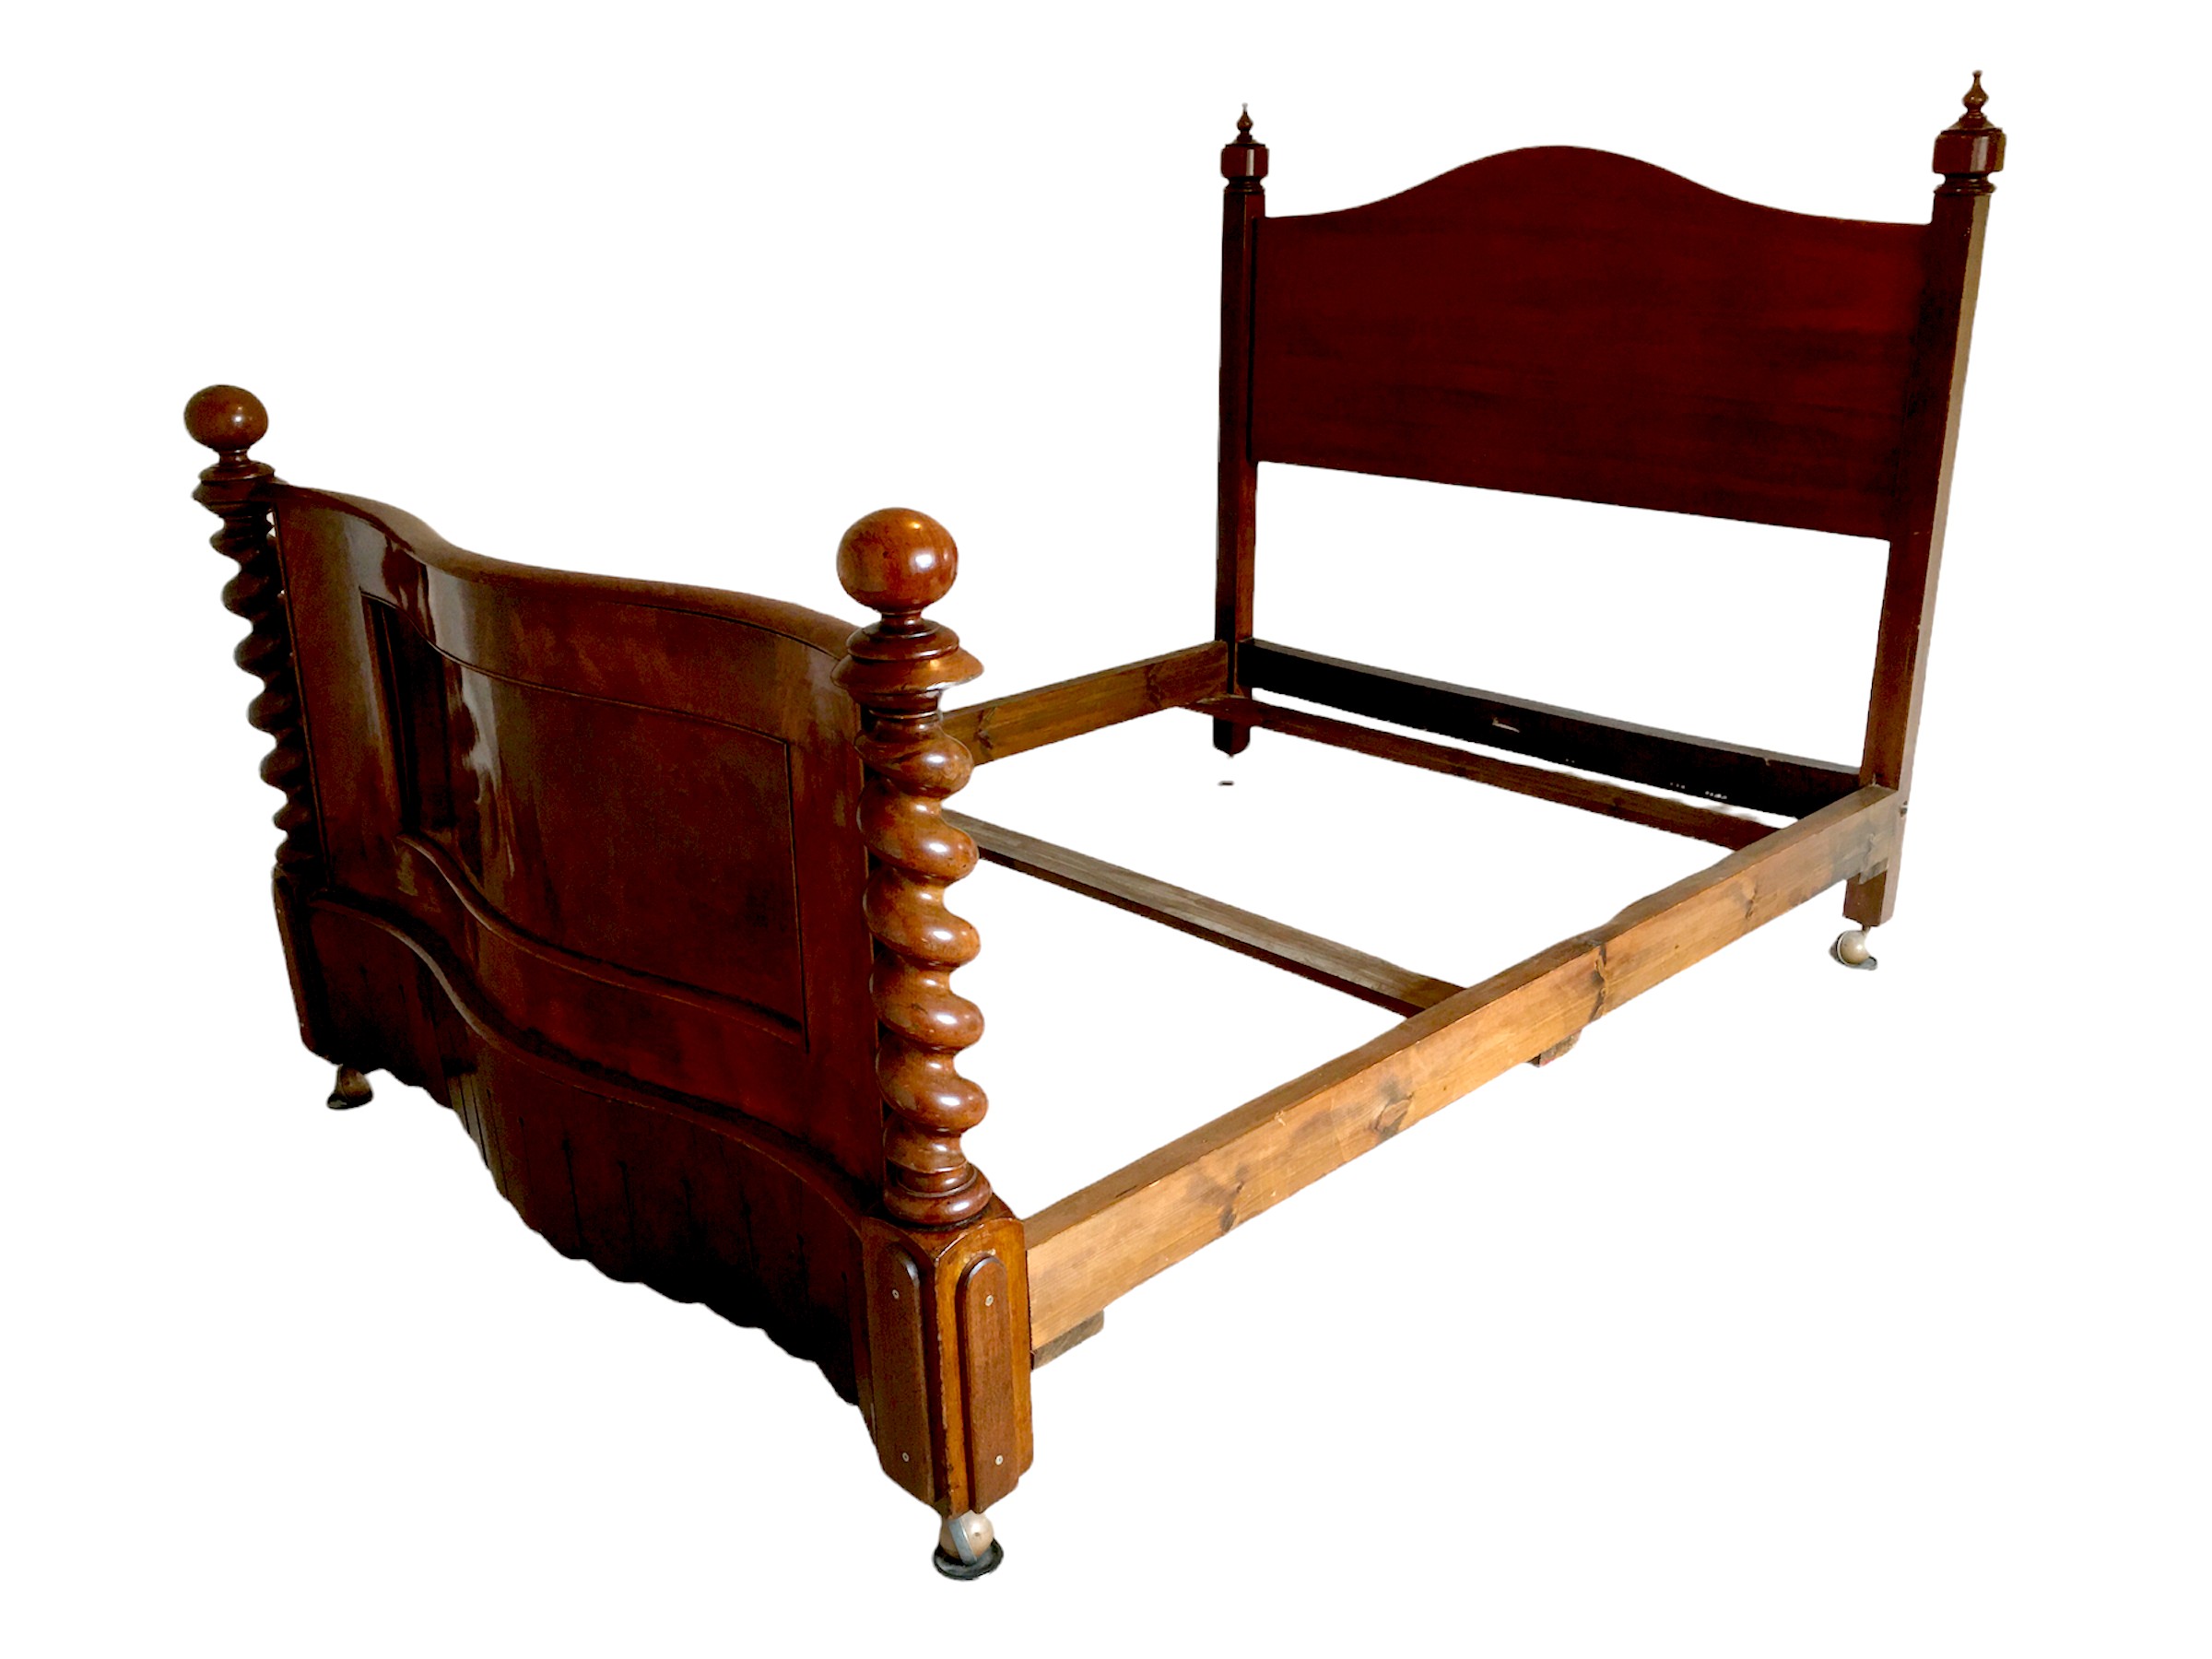 A Victorian mahogany double bed frame, serpentine foot board, and decorative spiral twist columns.